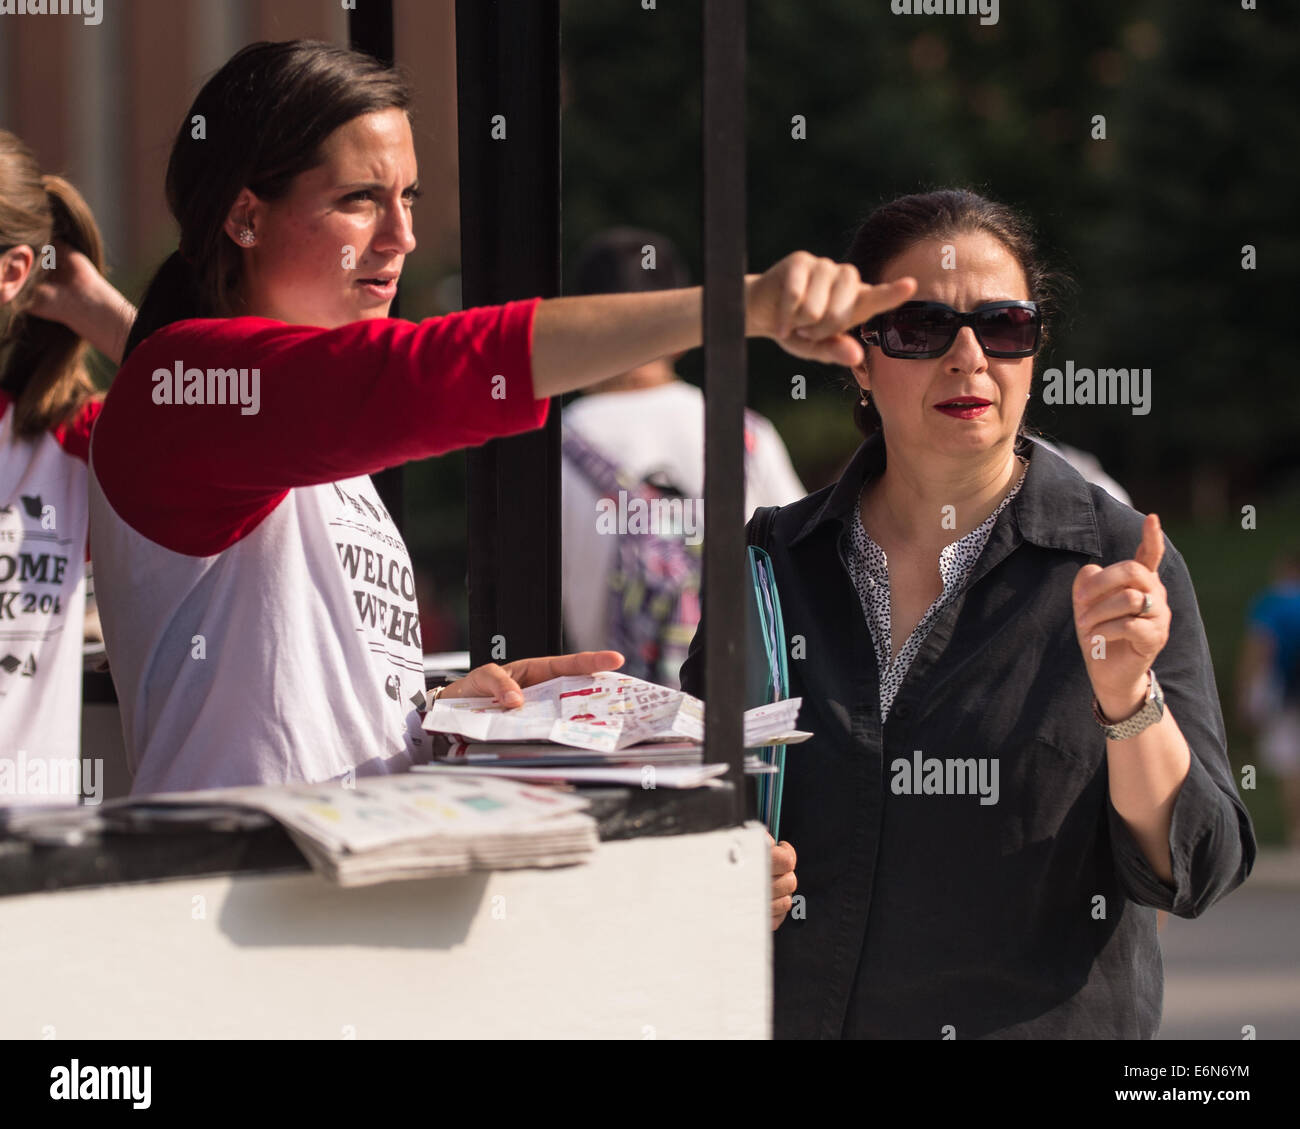 Columbus, Ohio, US. 27th Aug, 2014. OSU Junior Armelle Desiso of the Office of student Life gives directions to a fellow student during the first regular day of classes at The Ohio State University in Columbus, Ohio. Credit:  Brent Clark/Alamy Live News Stock Photo